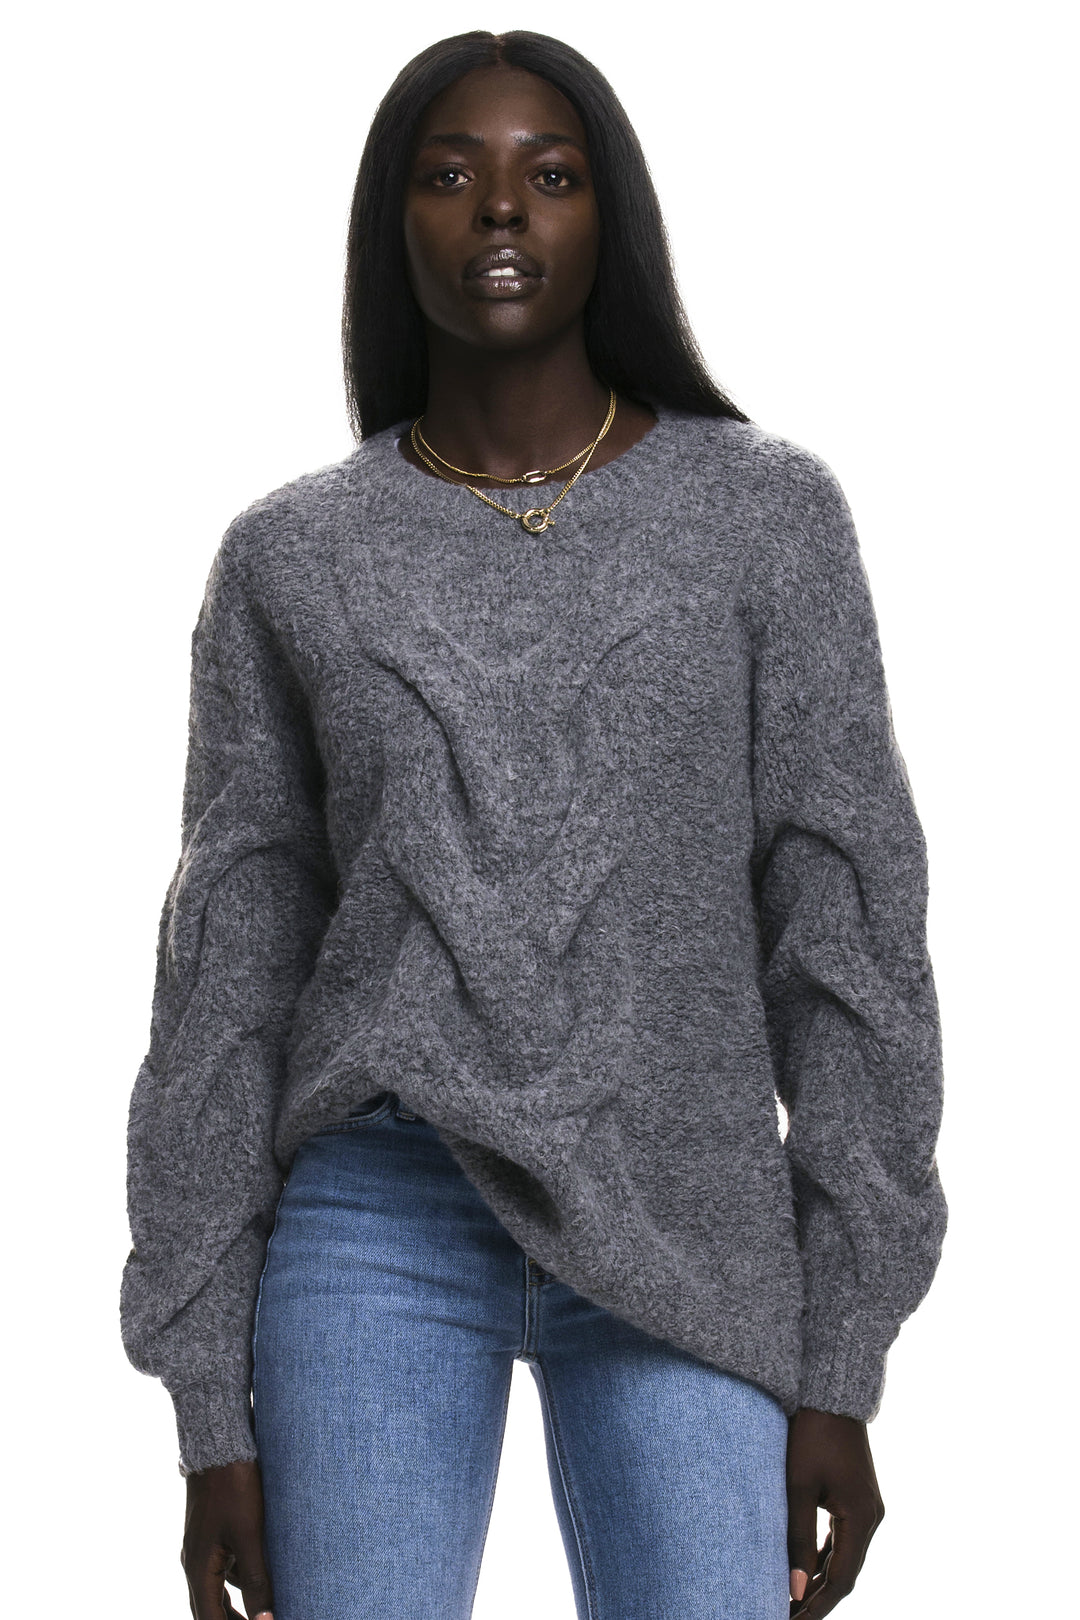 Spiral Twister Charcoal Cable Knit Sweater - Expressive Collective CO.